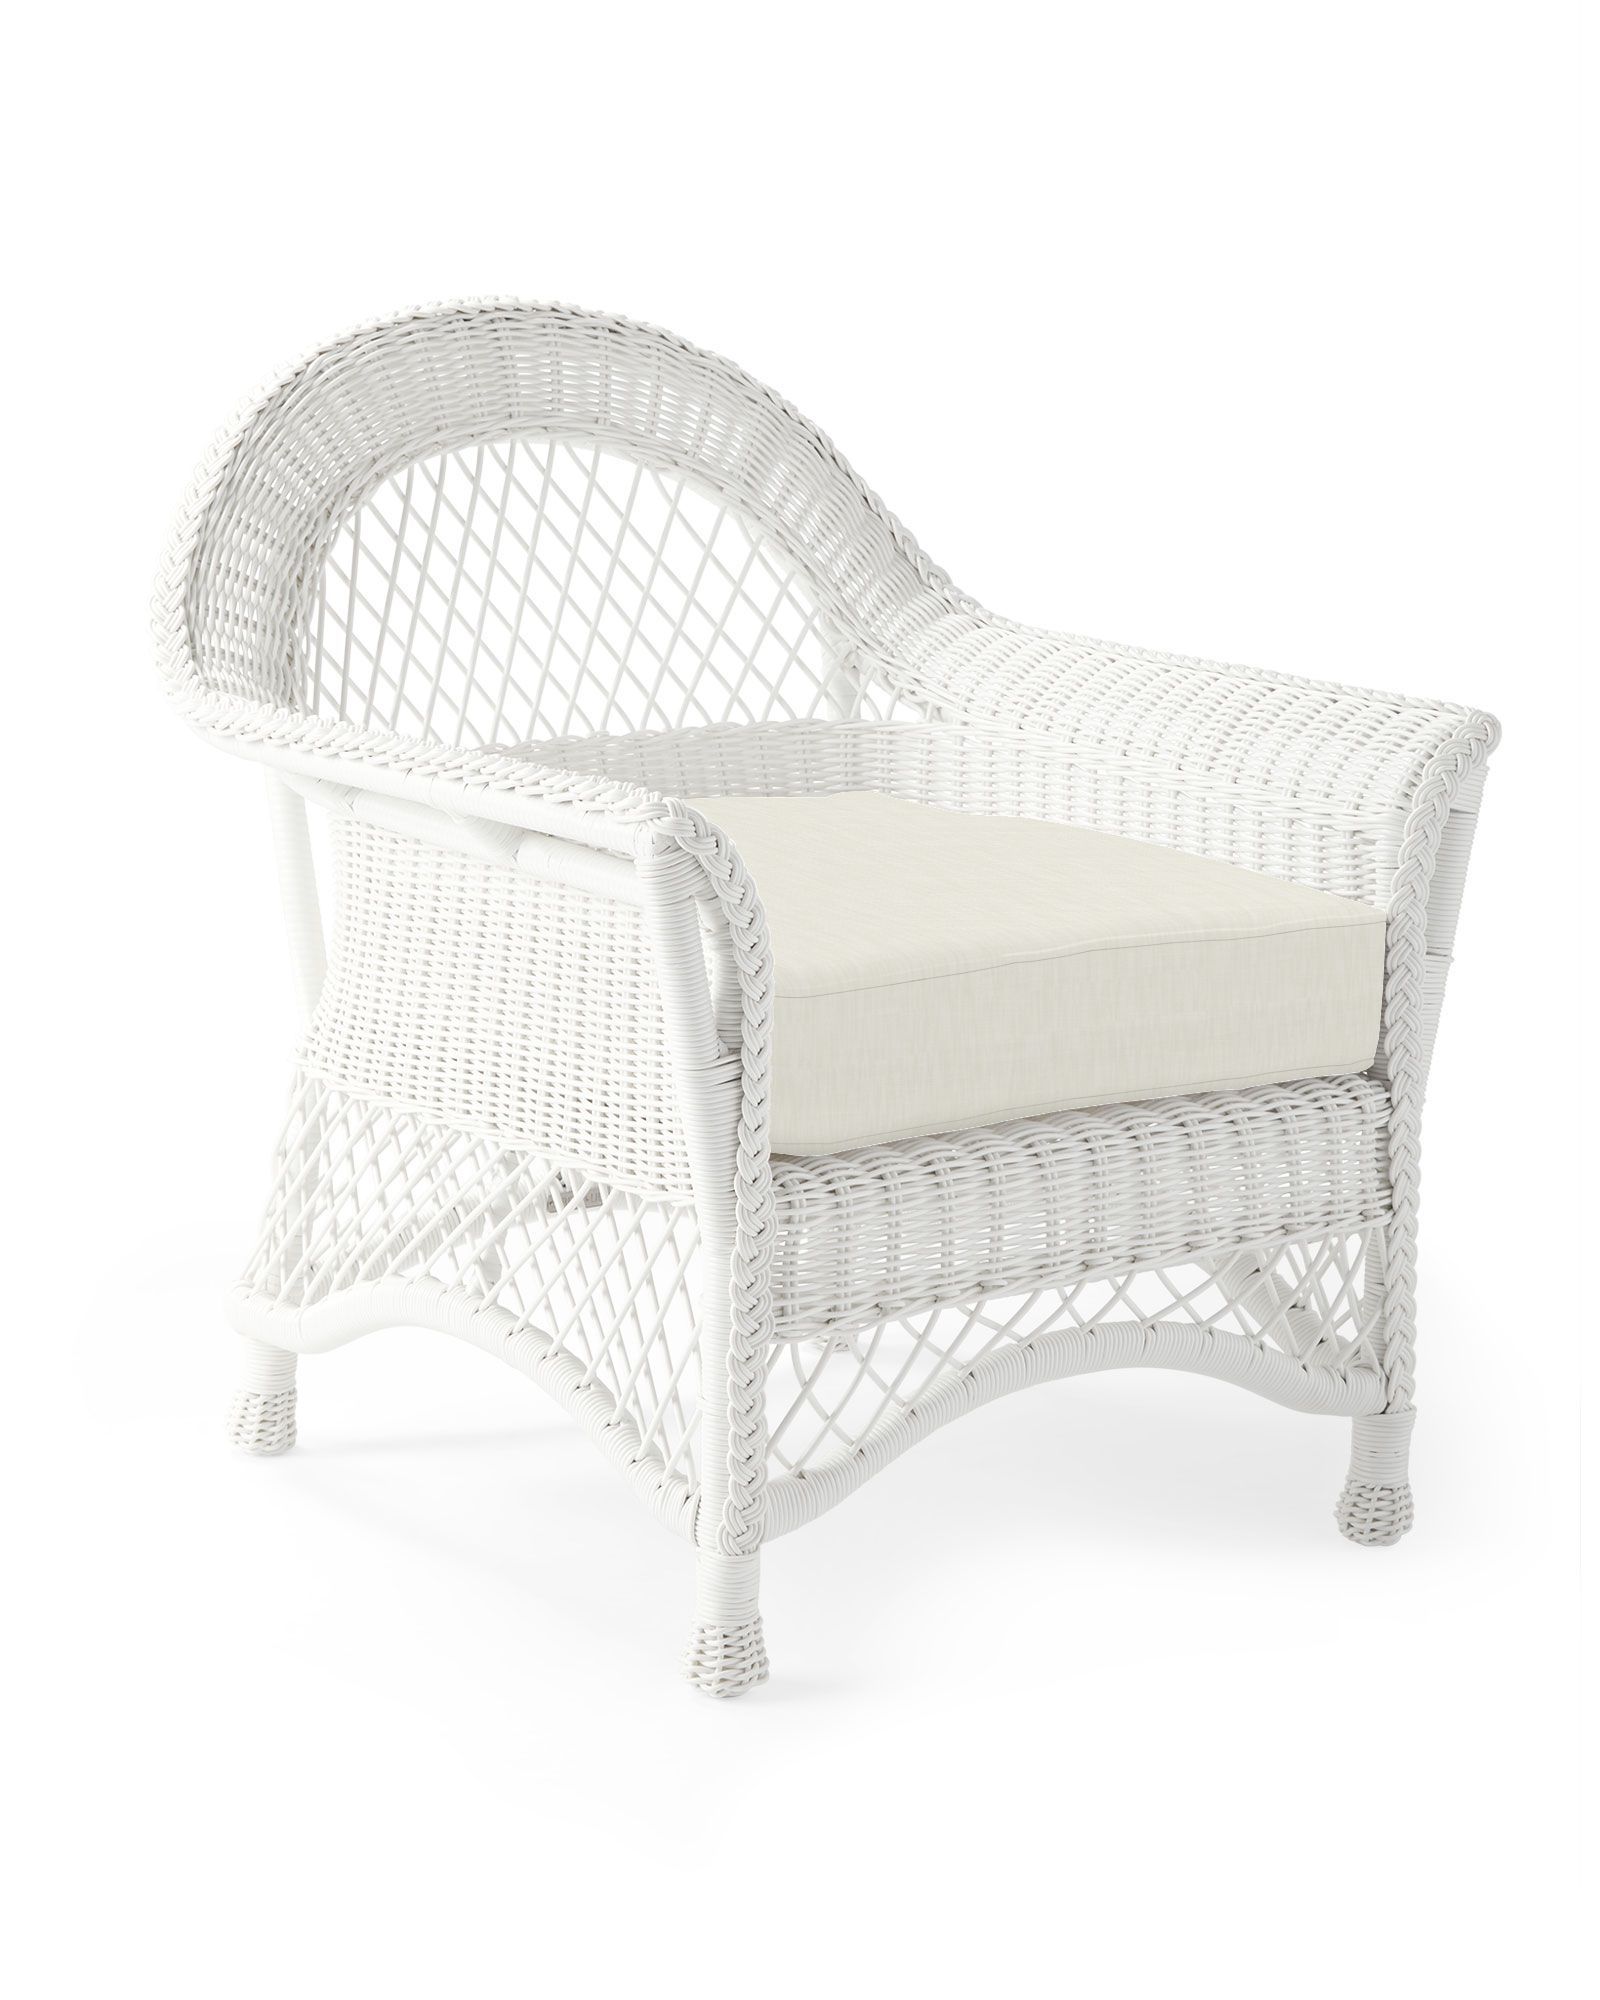 Kiawah Lounge Chair - White | Serena and Lily